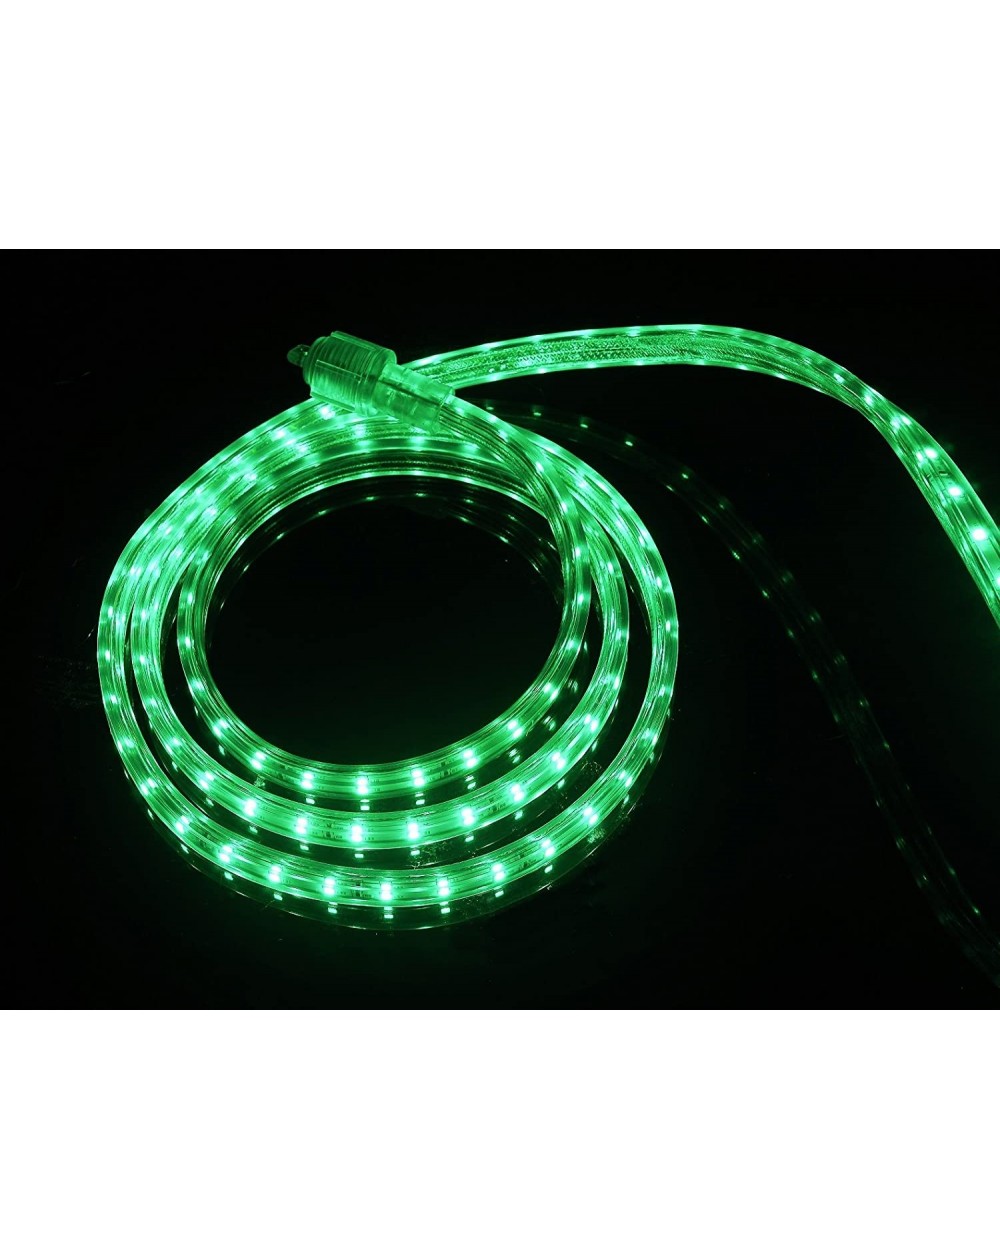 Rope Lights UL Listed- 3.3 Feet- 360 Lumen- Green- Dimmable- 110-120V AC Flexible Flat LED Strip Rope Light- 60 Units 3528 SM...